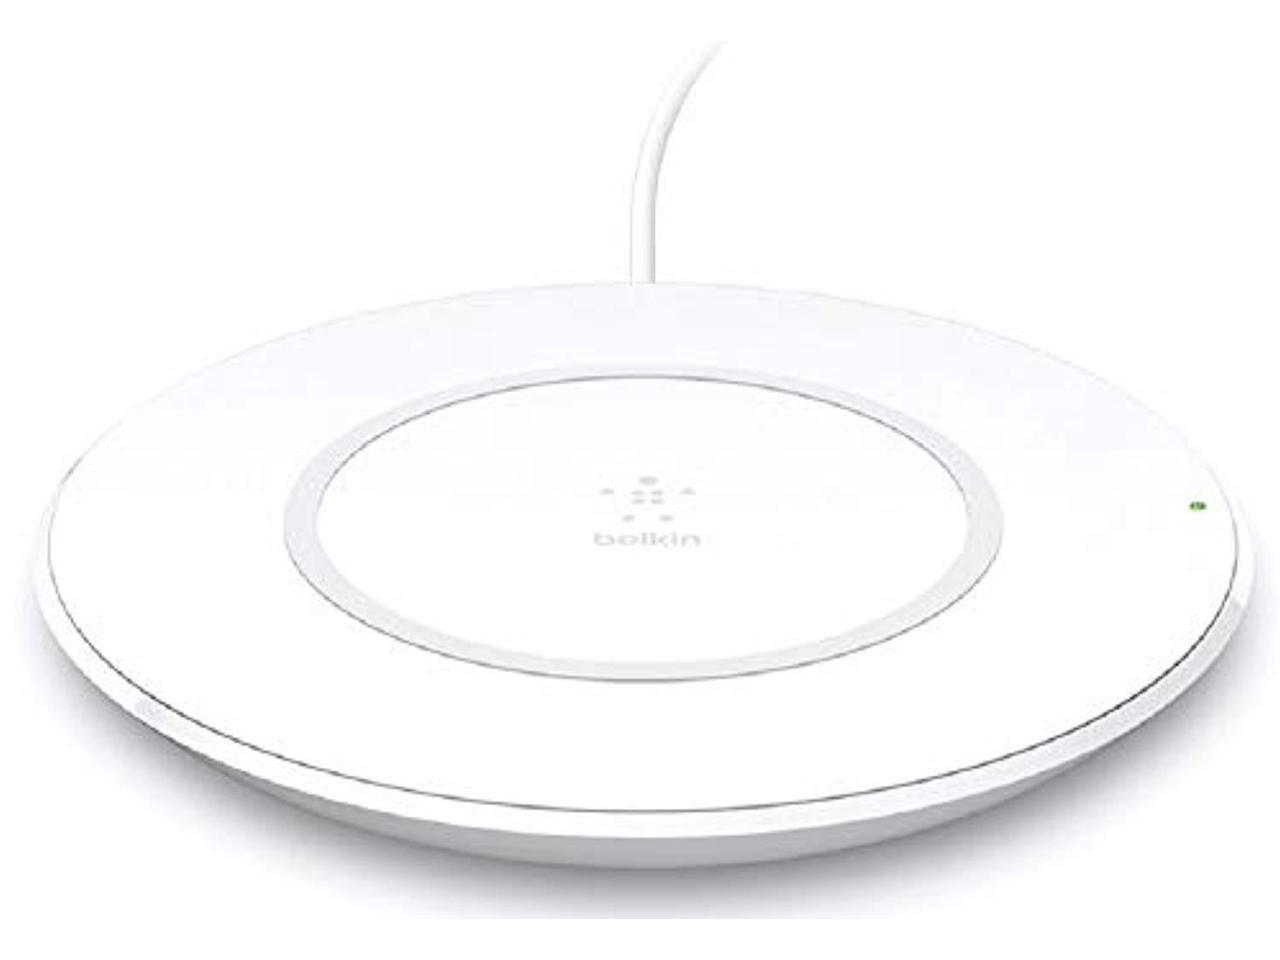 Belkin BOOSTUP Qi Wireless Charging Pad For iPhone X, iPhone 8 Plus, iPhone 8. Fast wireless Charging Performance For your iPhone X, iPhone 8 and 8 Plus. Delivers up to 7.5W of Power Model BLKF7U027DQ